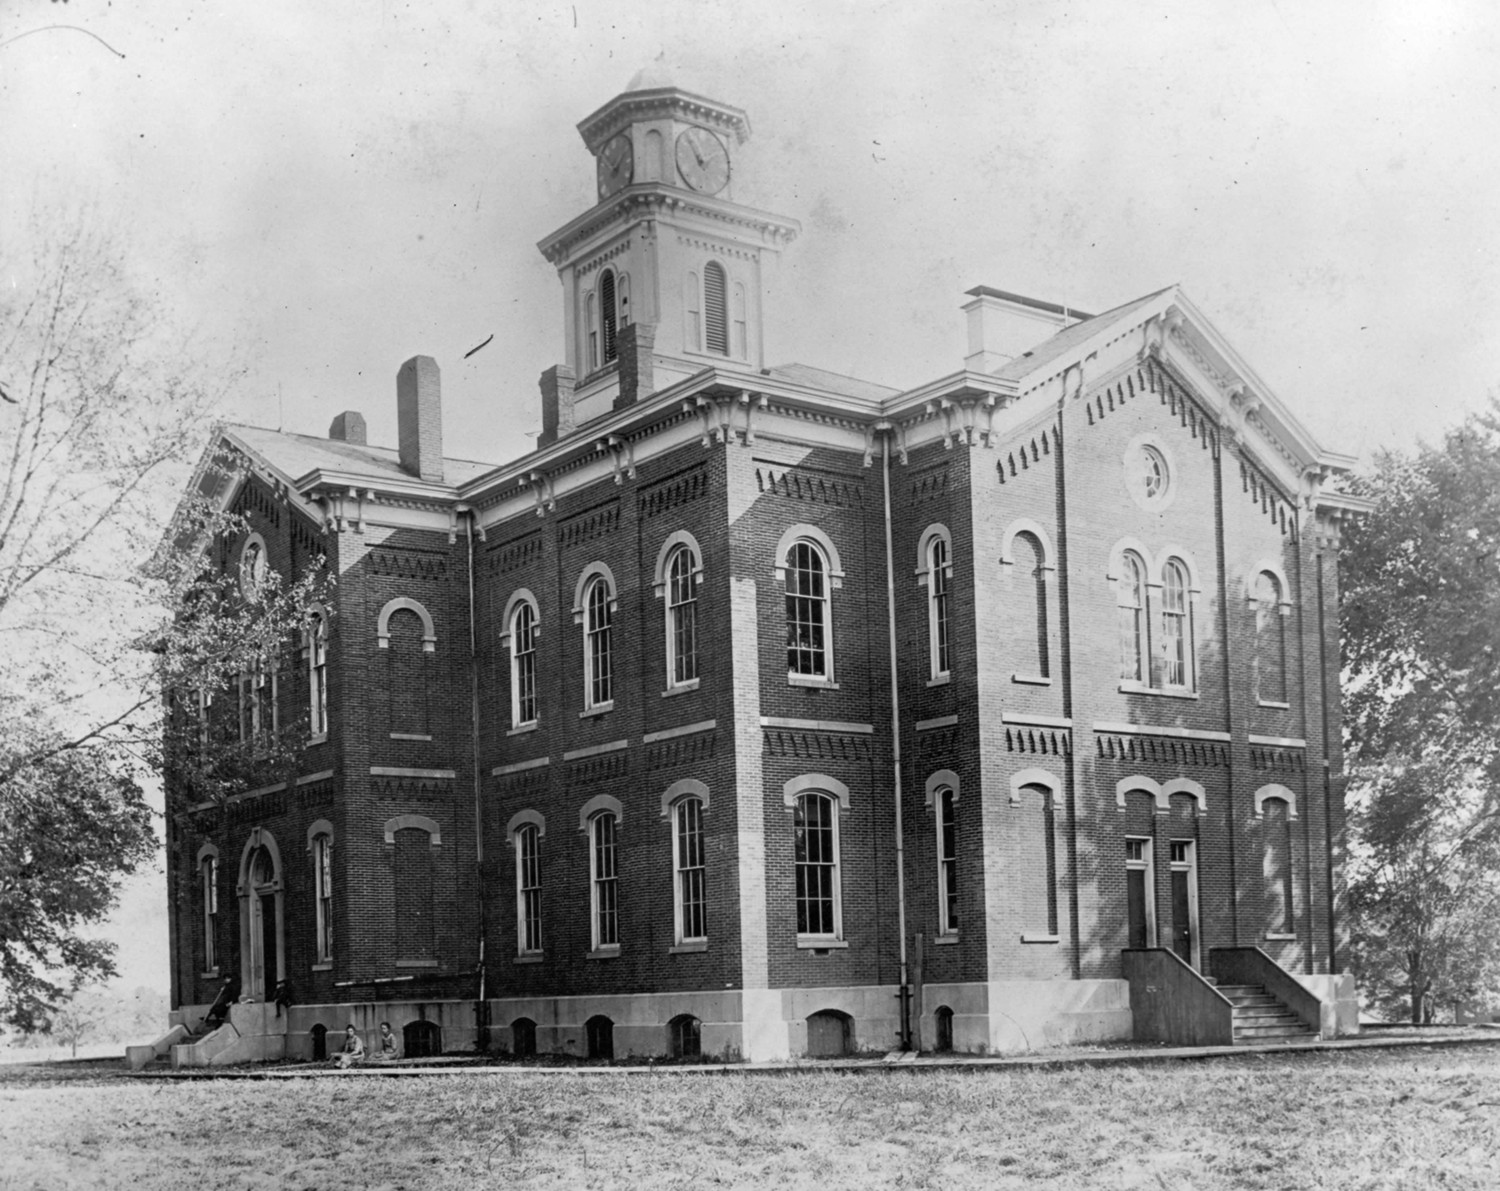 Pittsfield East School, Pittsfield Illinois Looking from the southeast at the school (1900)